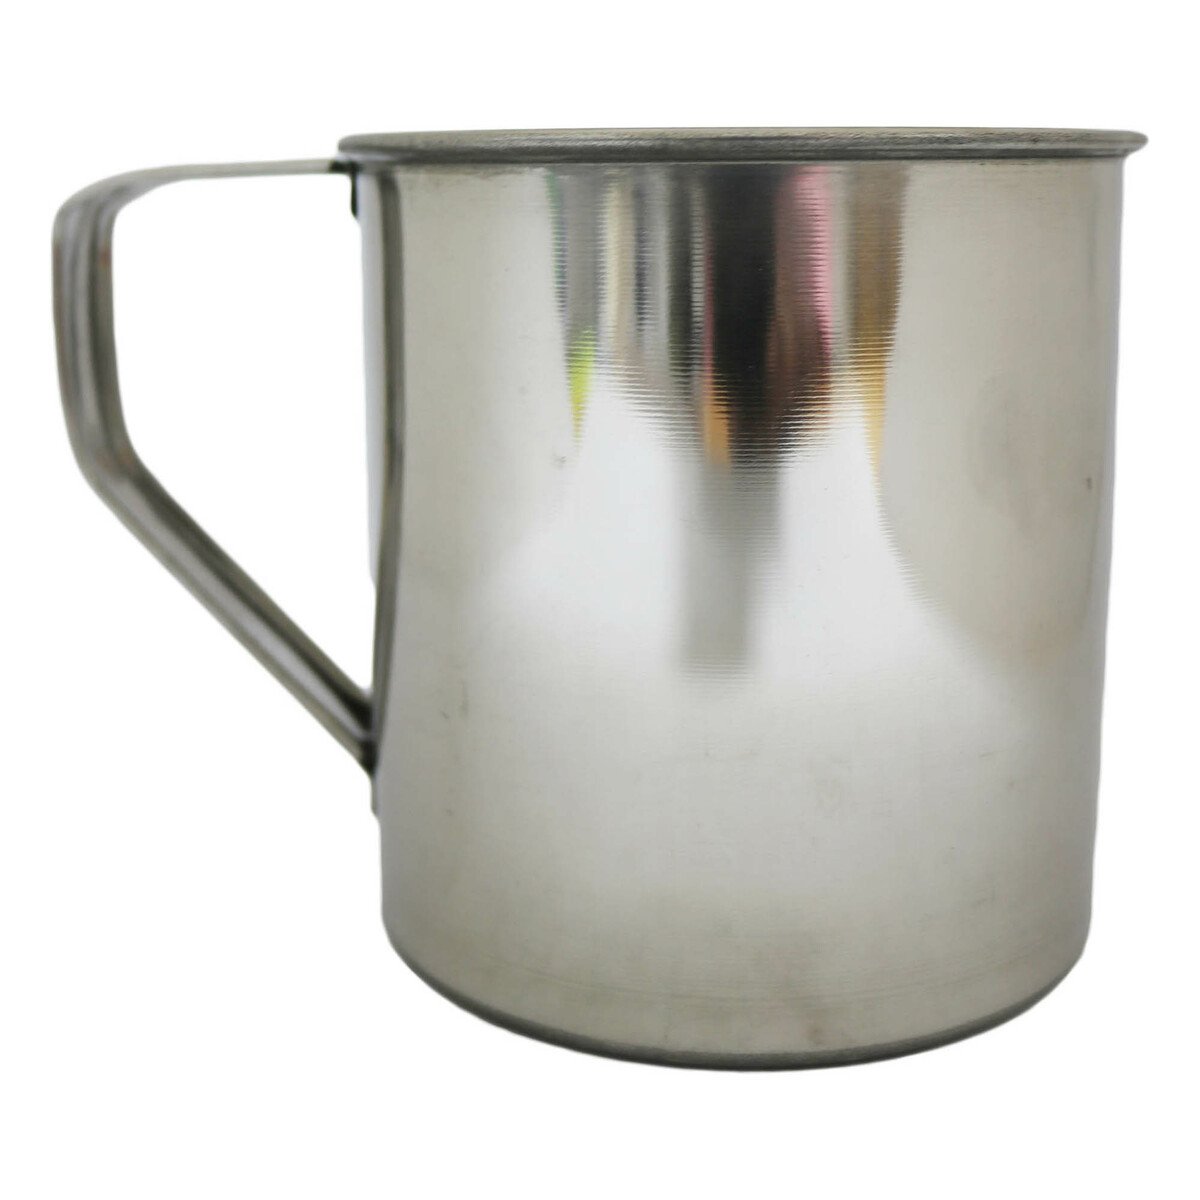 Chefline Stainless Steel Deluxe Mug No.3 Ind